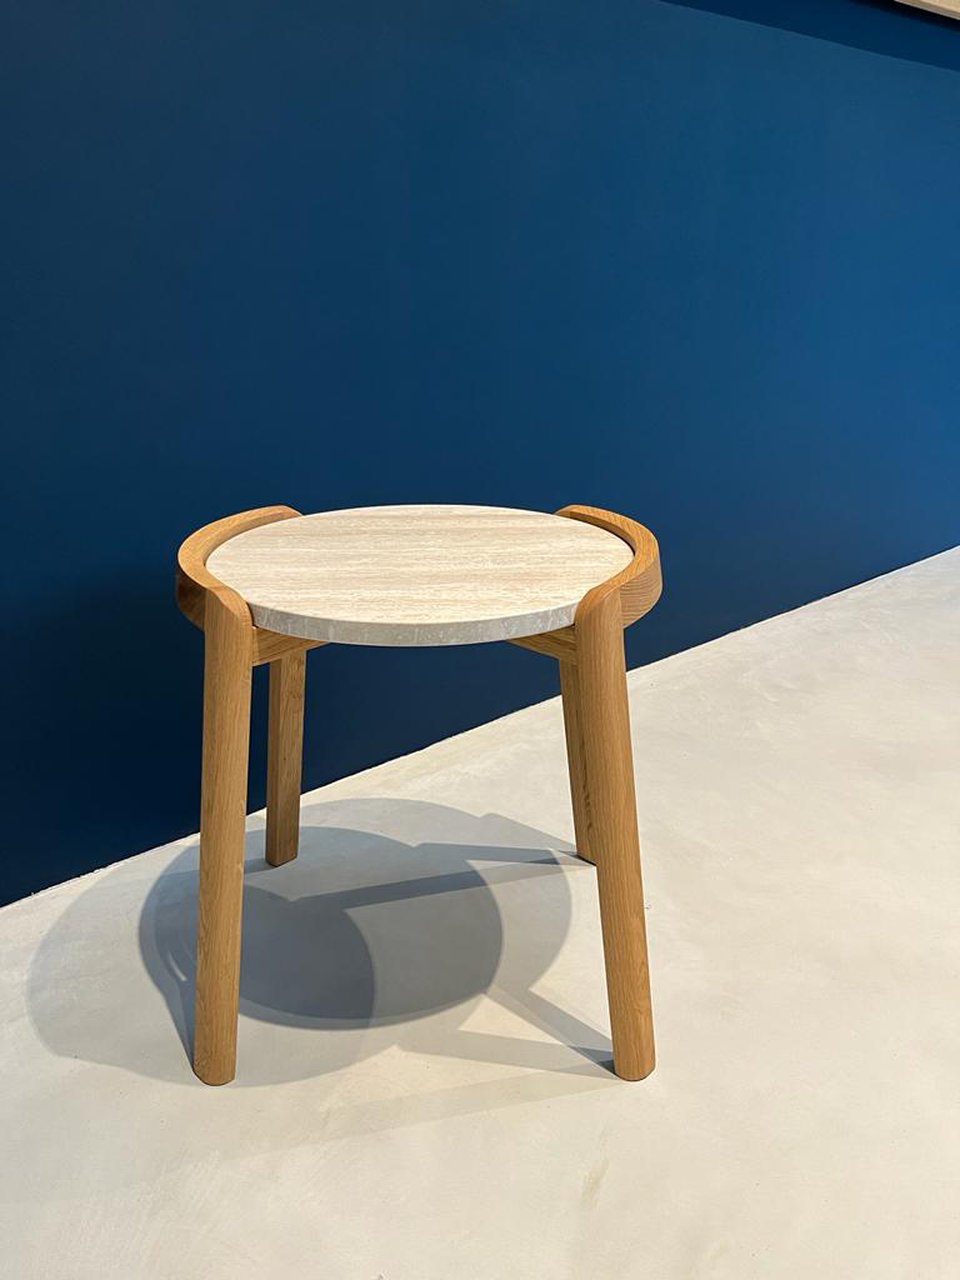 Bolia MIX side table 46cm natural oak with travertine top image 1